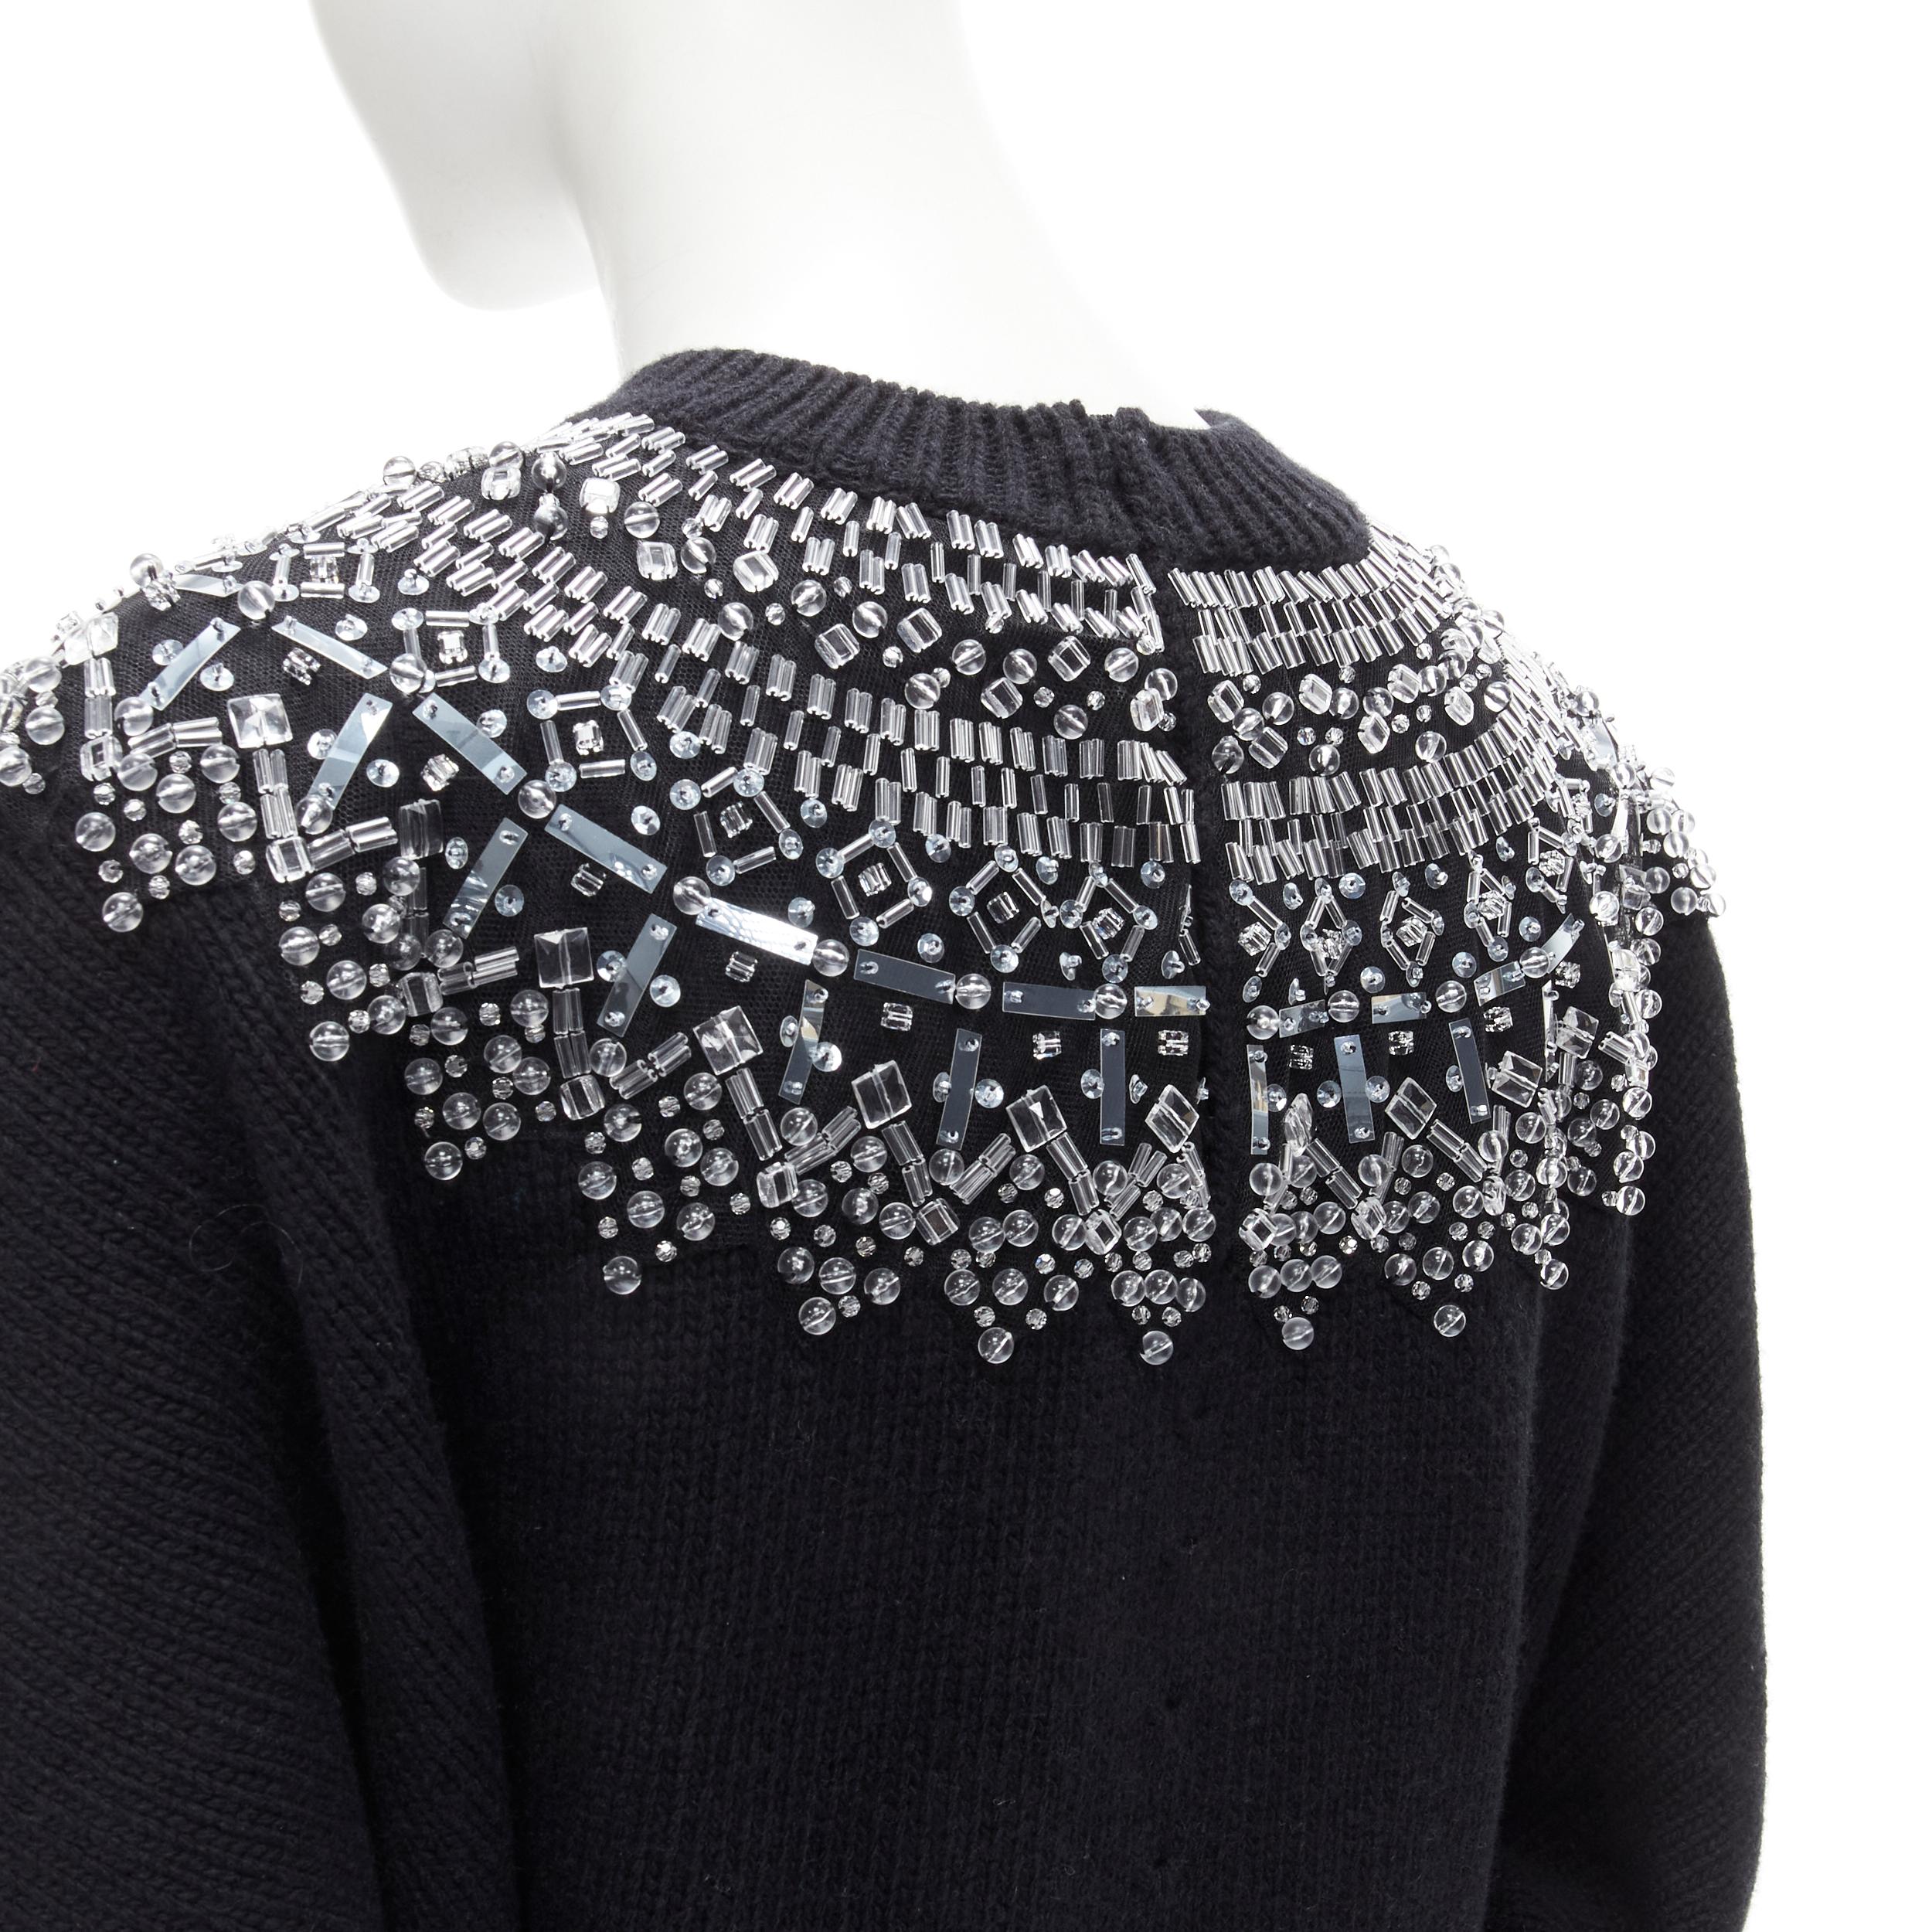 CHANEL wool cashmere black crystal bead embellished fairisle sweater FR34 XS For Sale 2